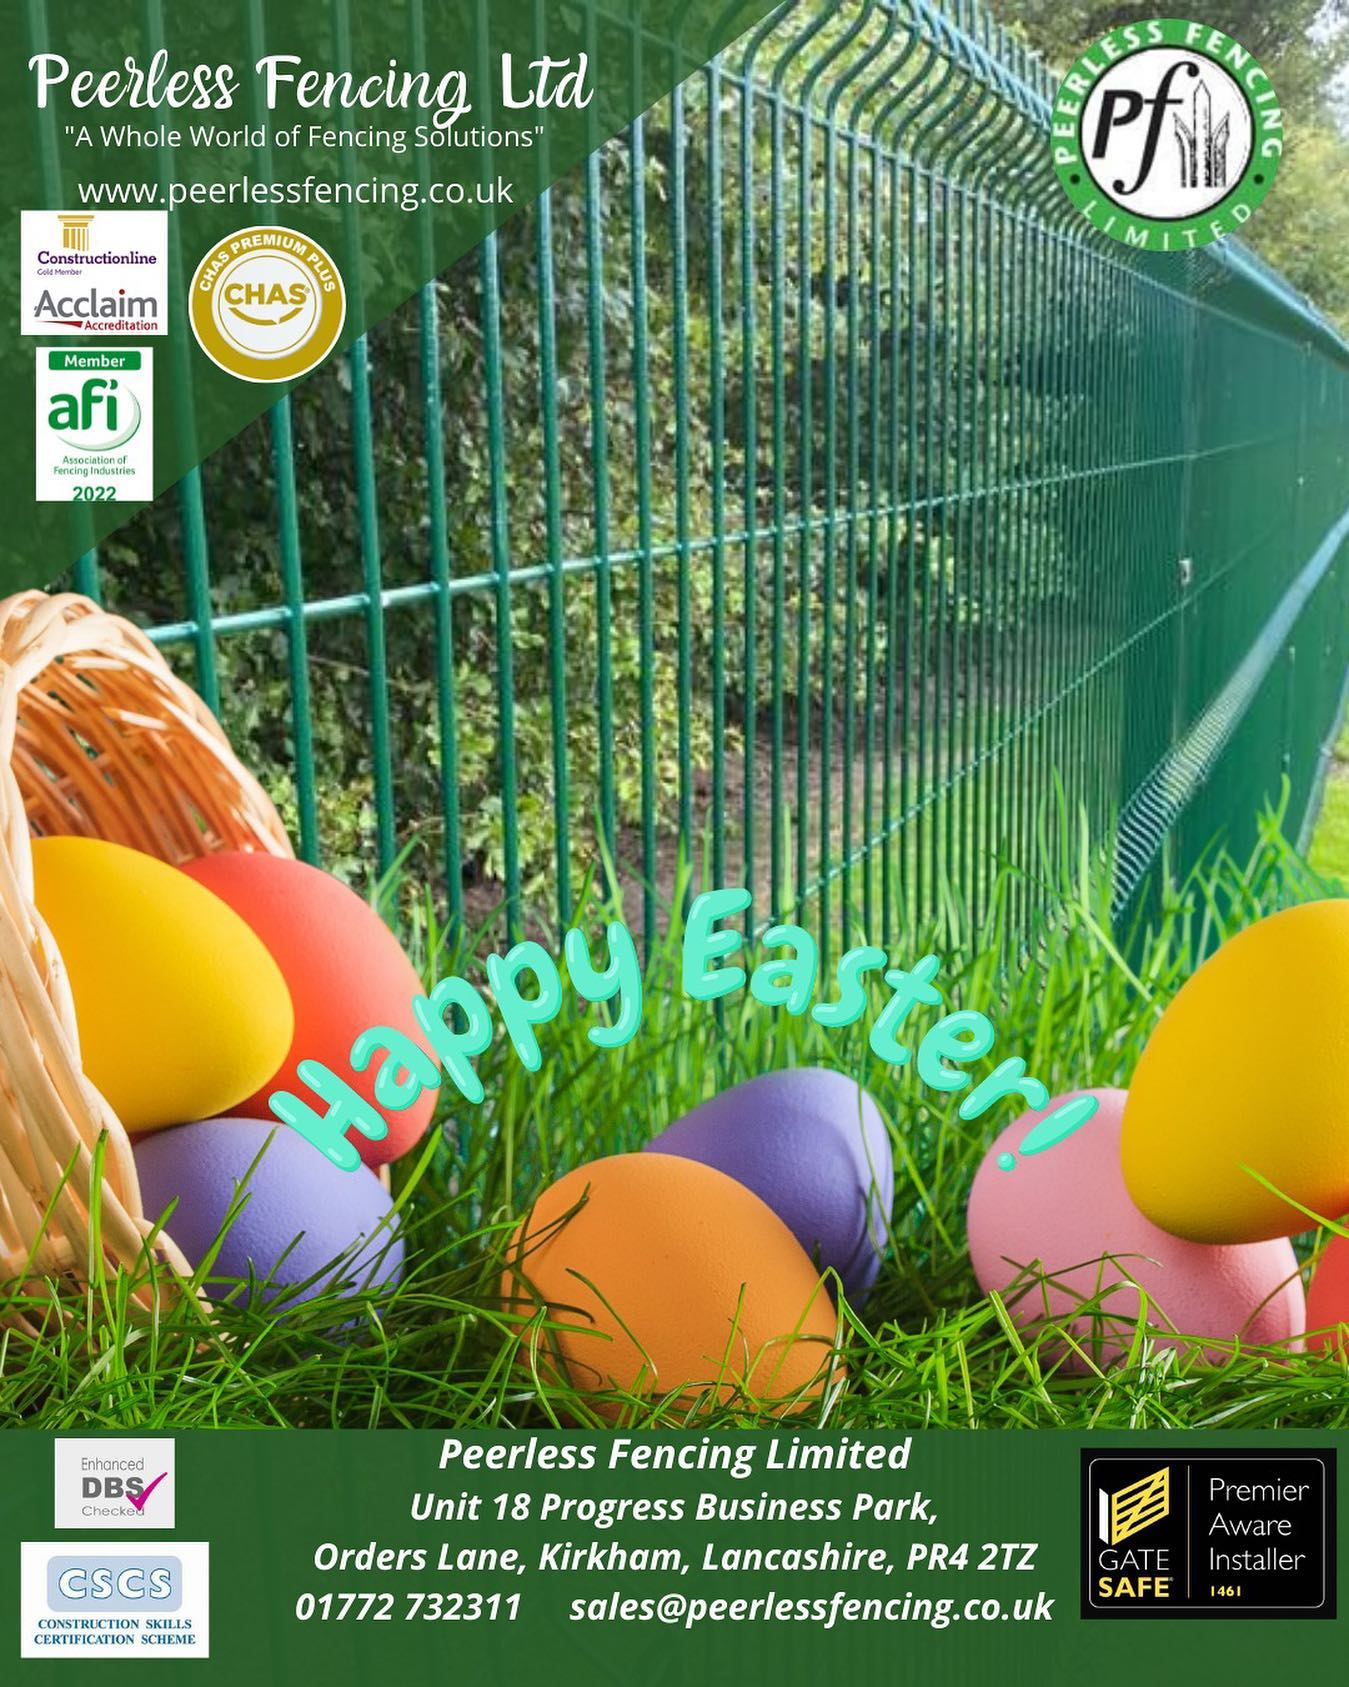 Happy Easter 🐣
All the best from us all at Peerless Fencing Ltd .